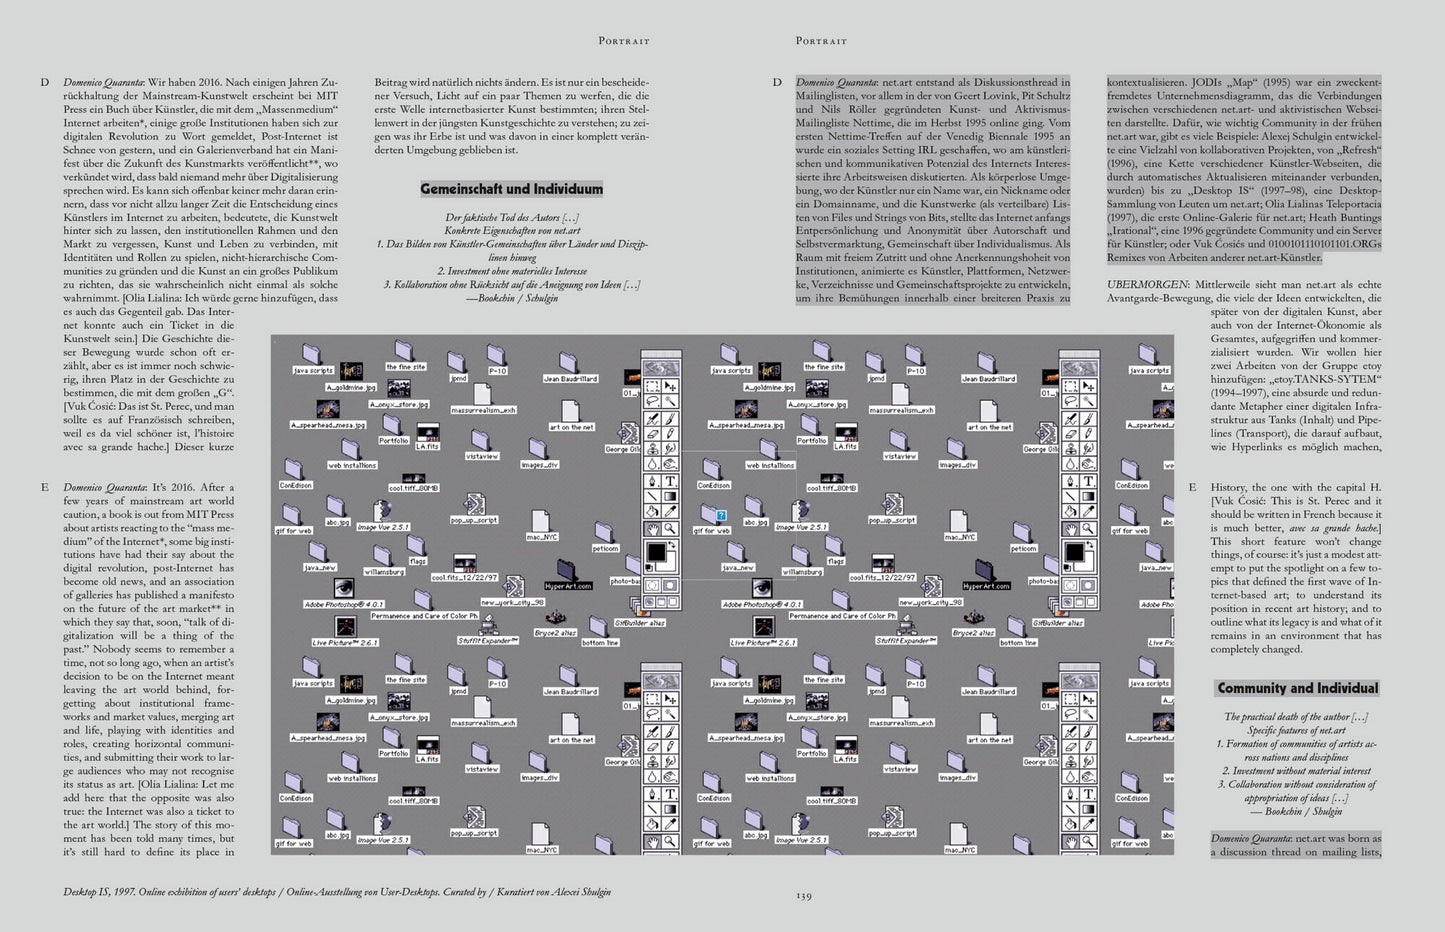 Spike ePaper (Issue 49): Net Art and After